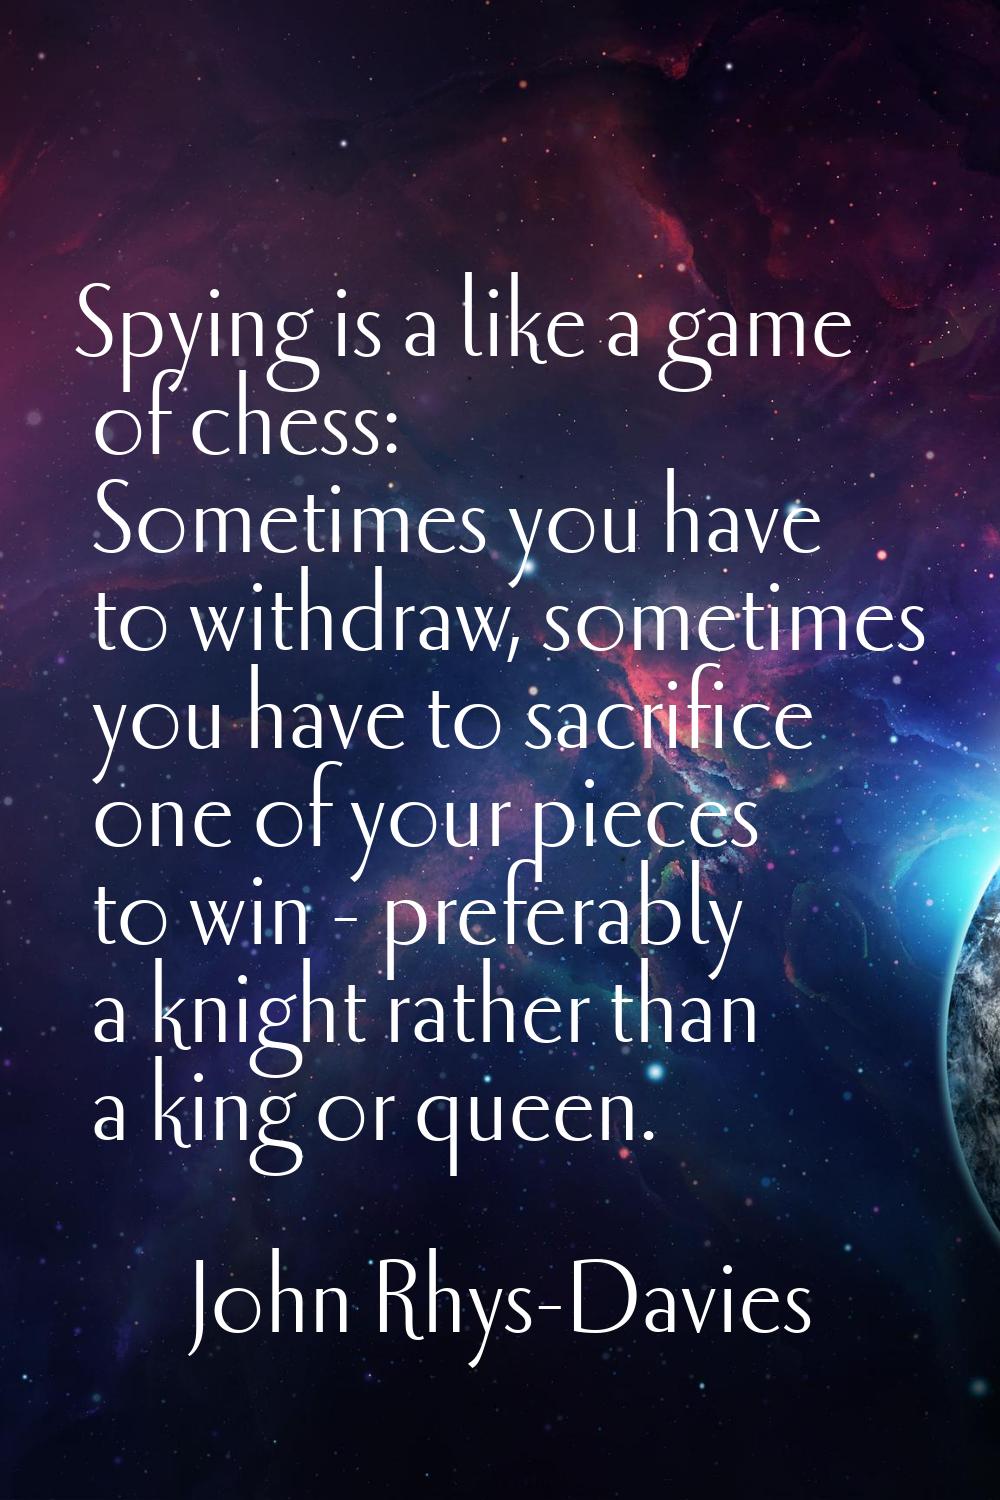 Spying is a like a game of chess: Sometimes you have to withdraw, sometimes you have to sacrifice o